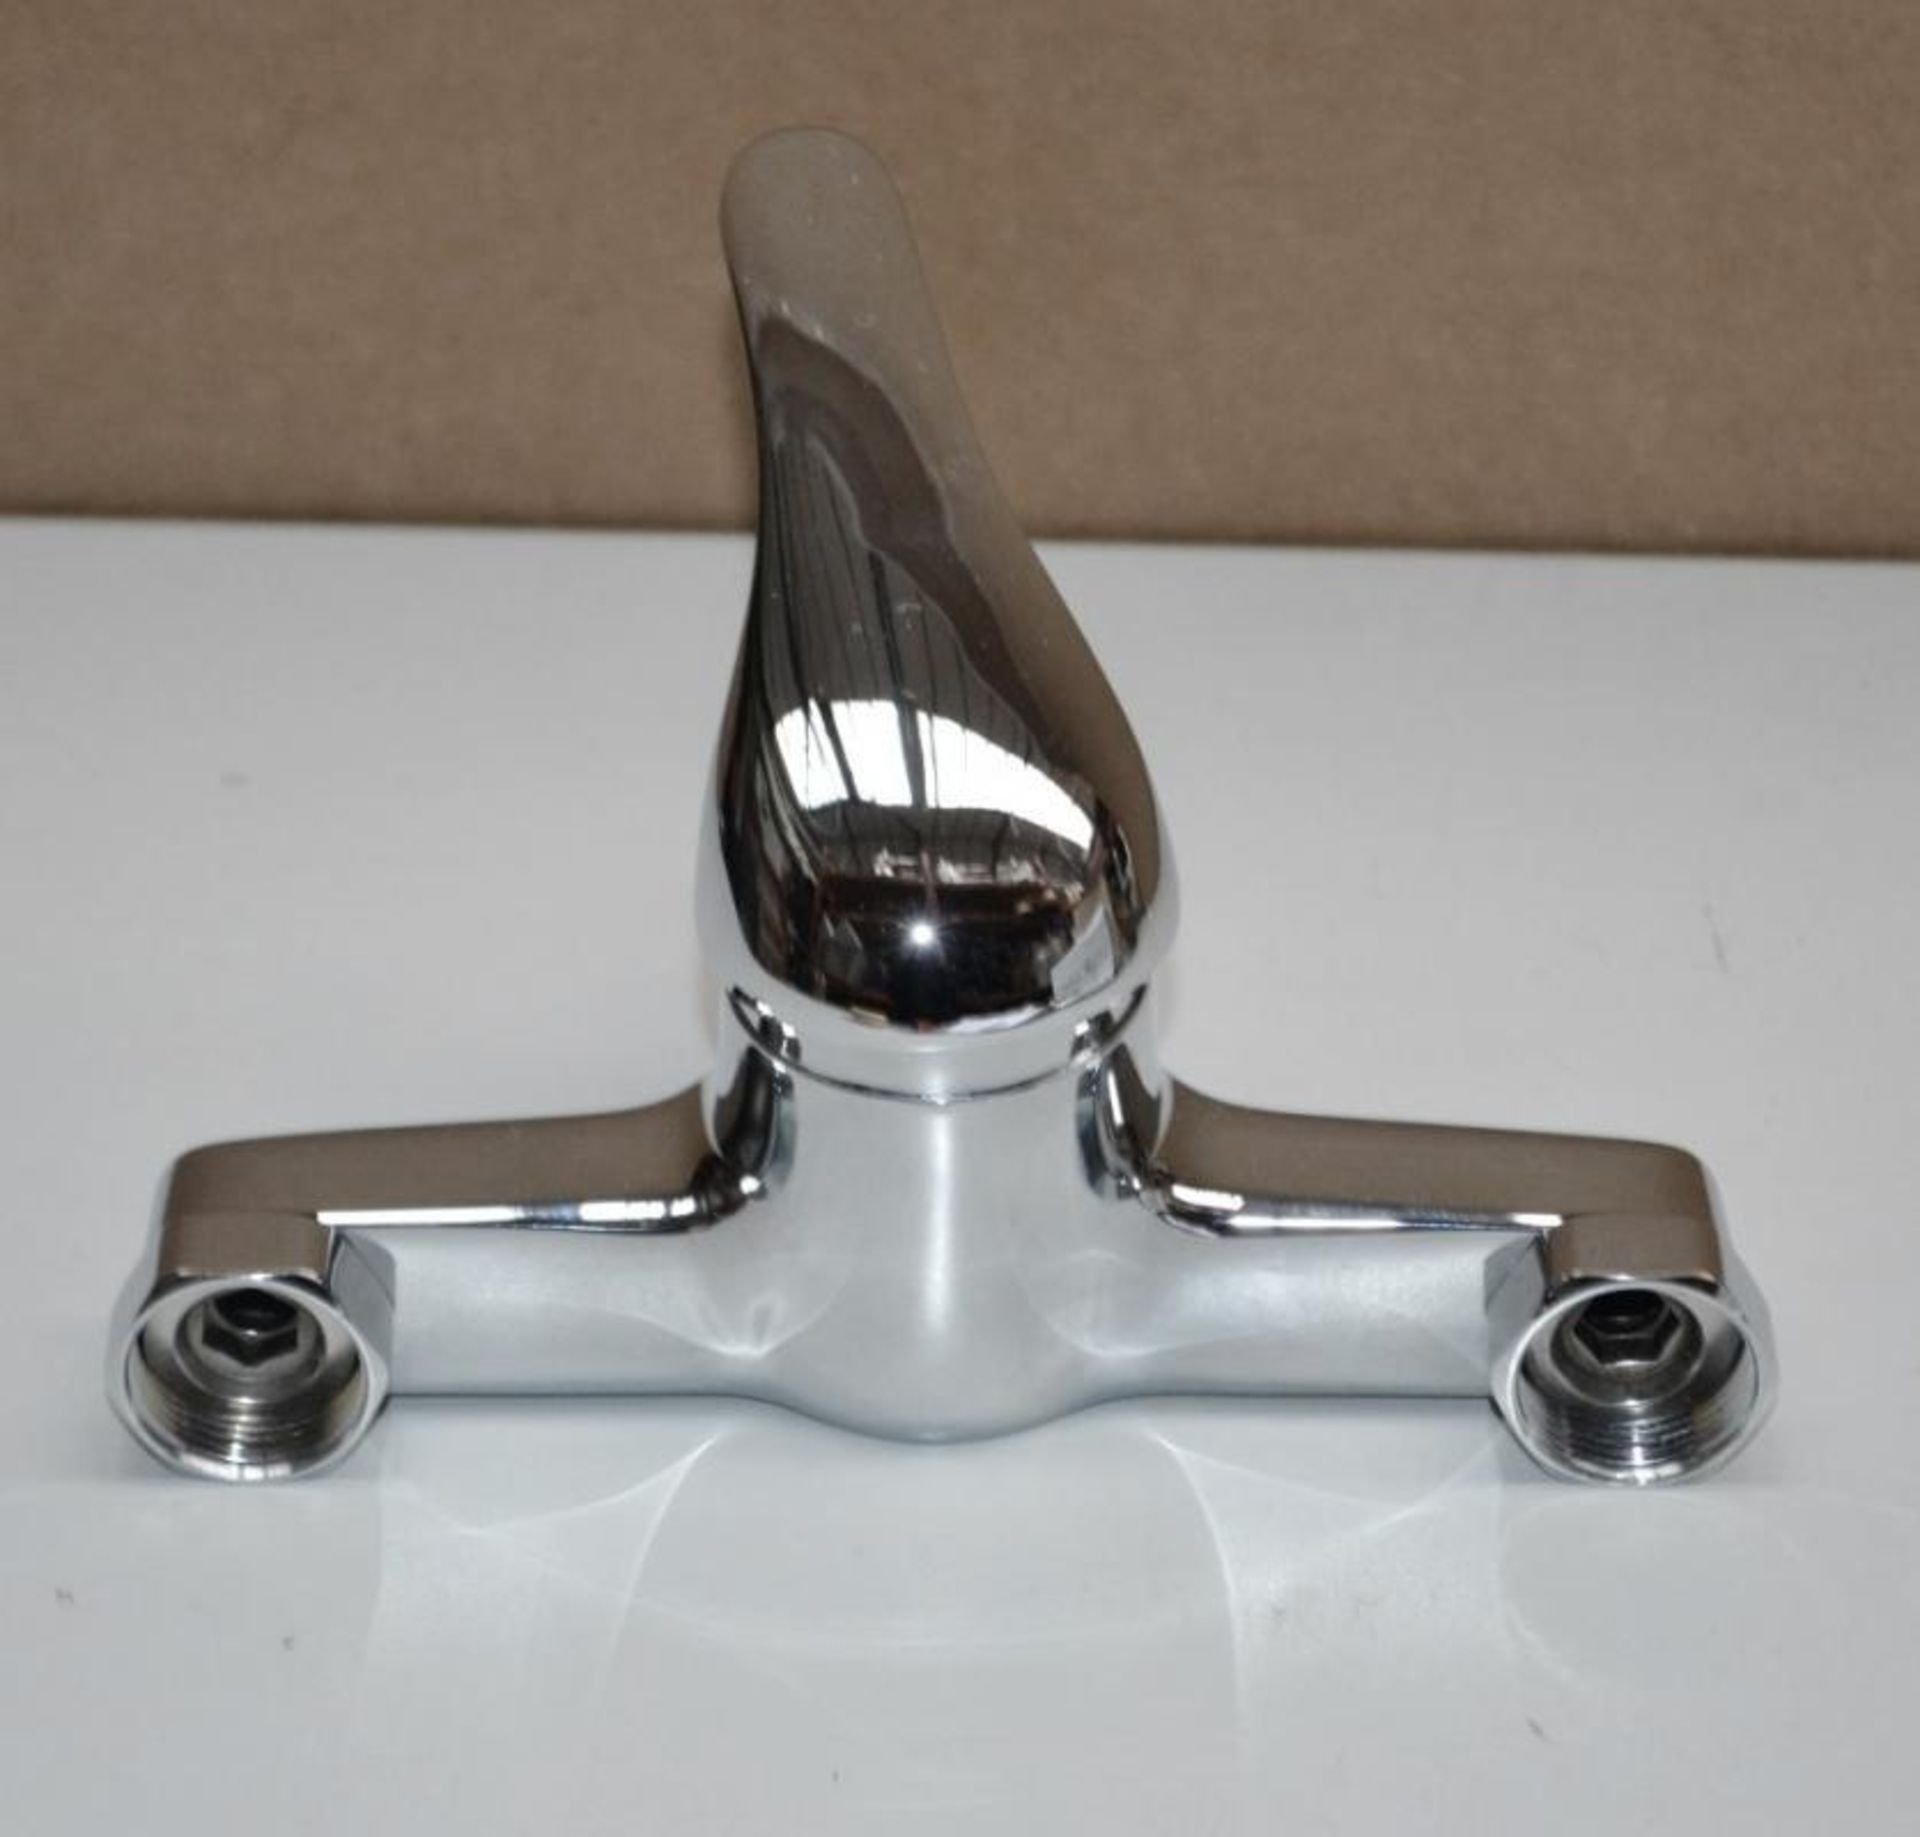 1 x PULSE Single Lever Bath Shower Mixer Tap In Chrome (Model: 112G2) - Ref: M188 - CL190 - Unused B - Image 5 of 7